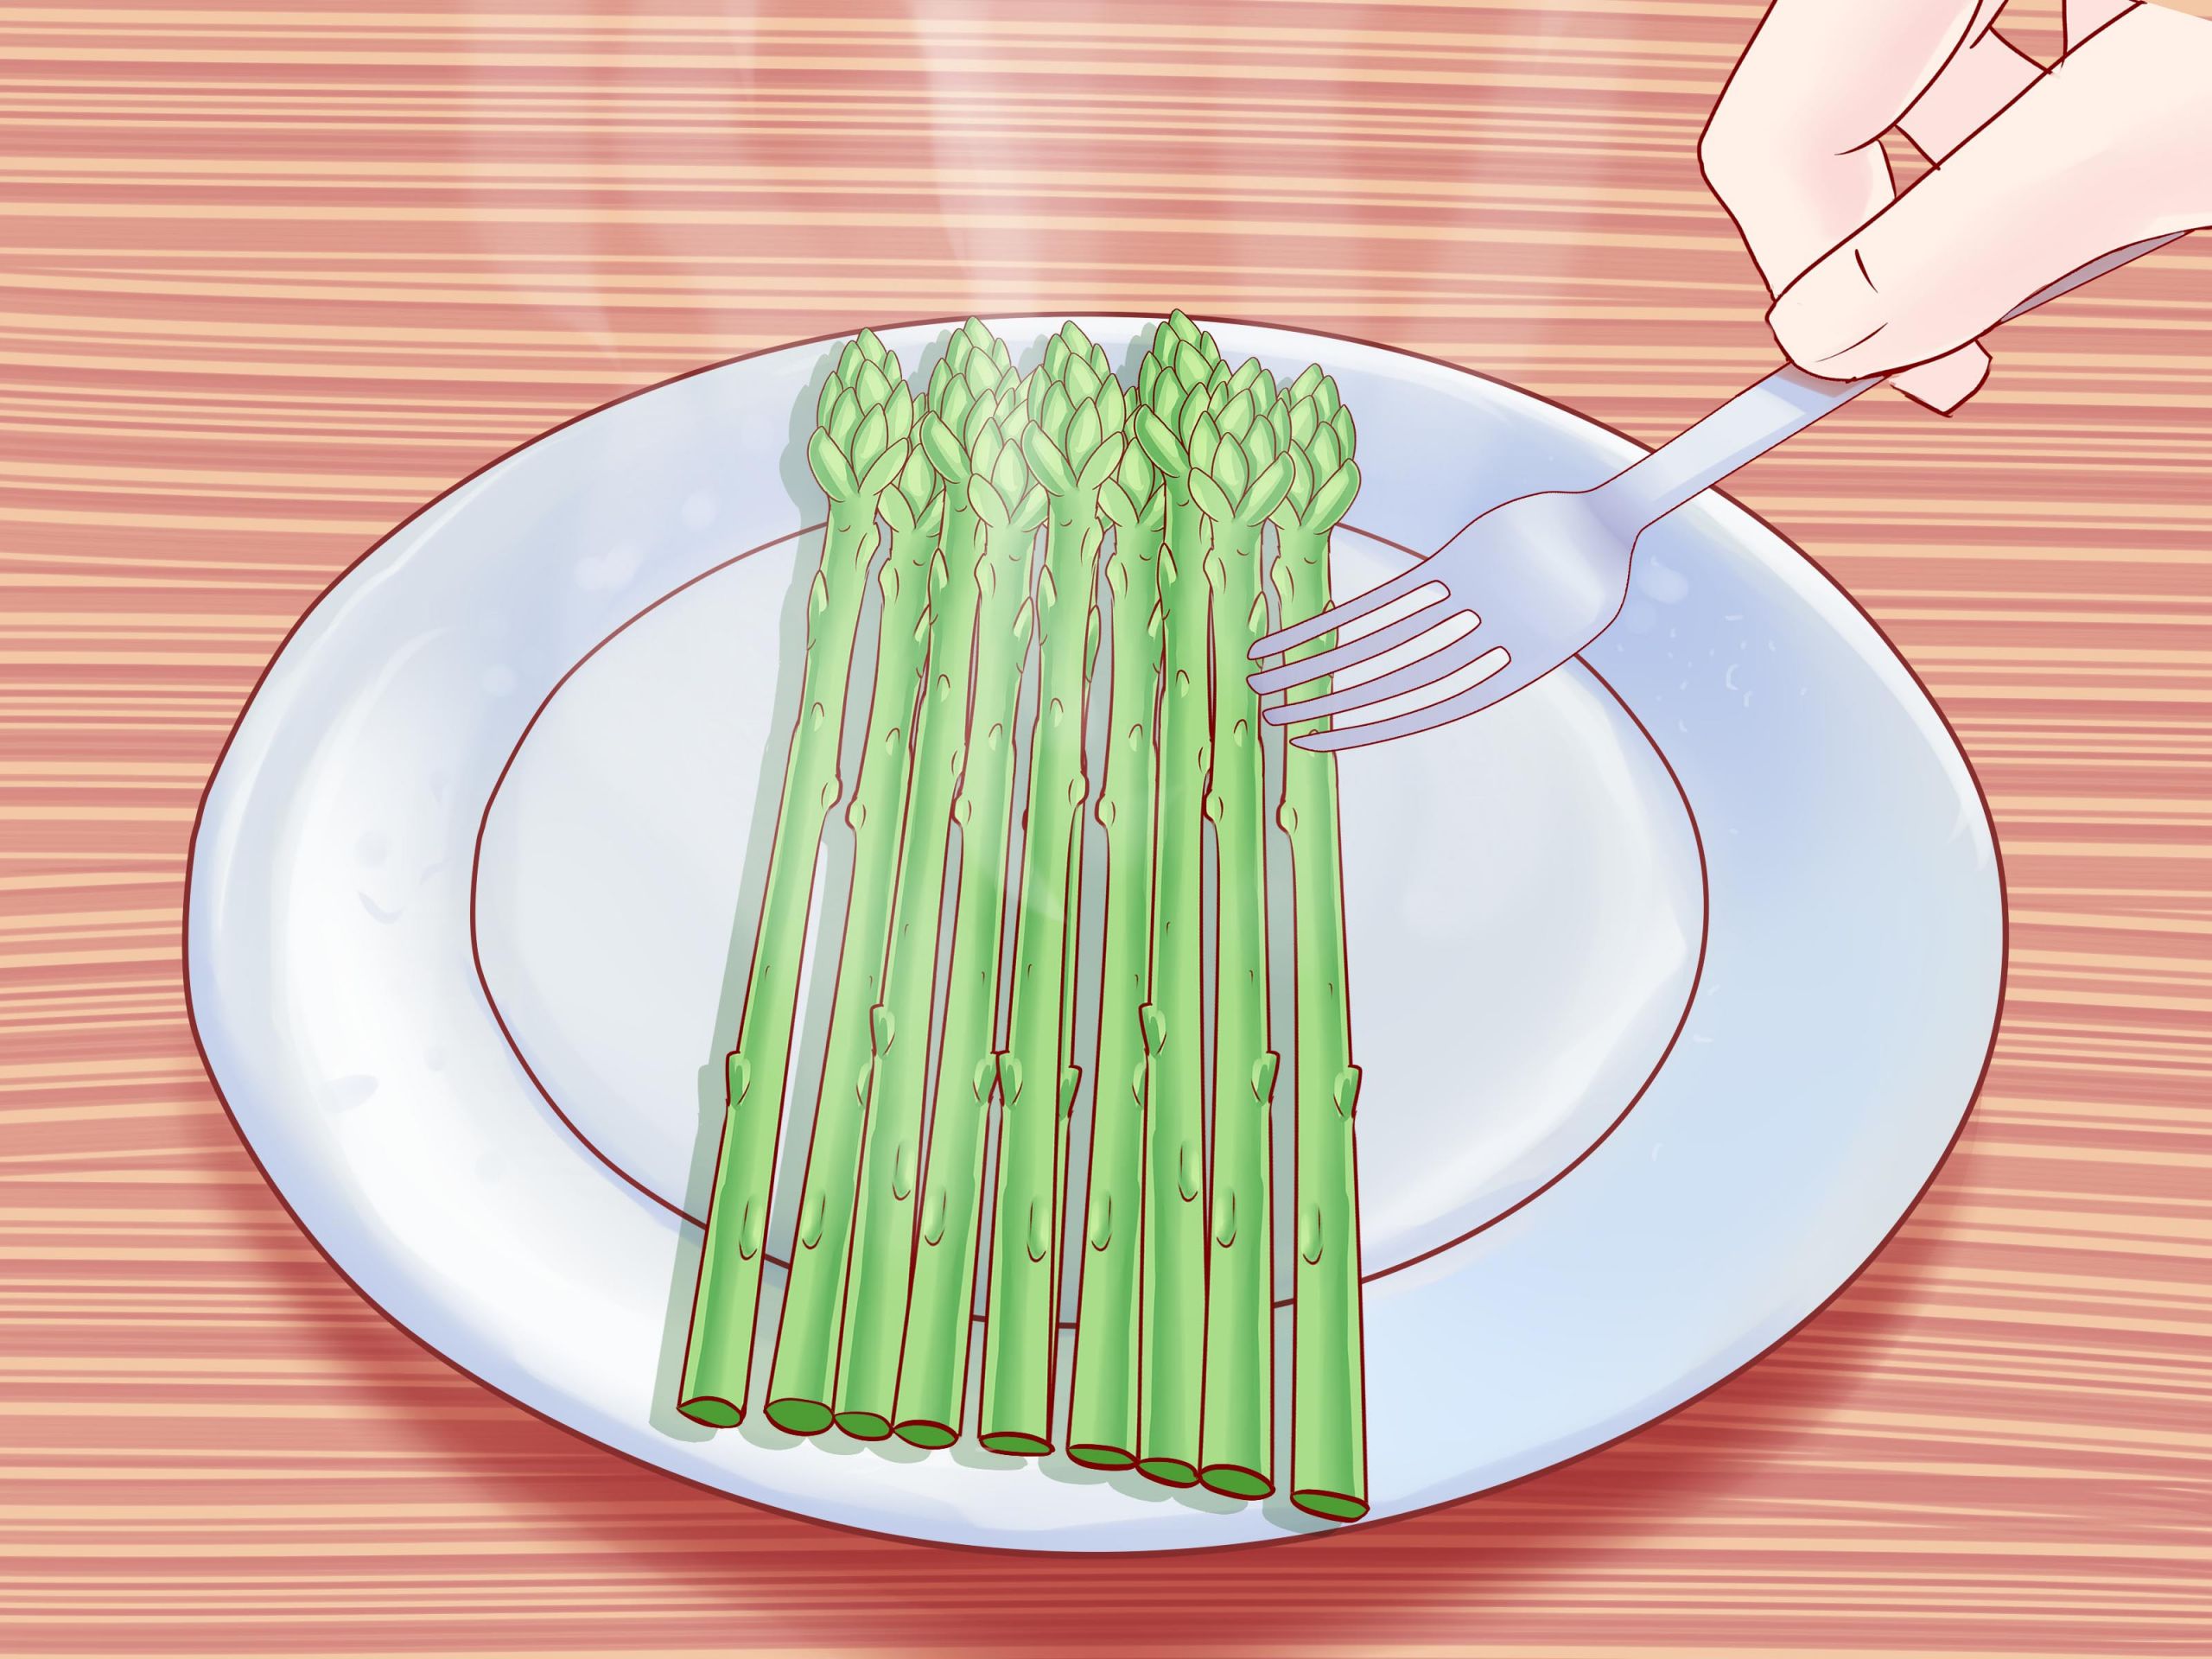 Asparagus In The Microwave
 4 Ways to Cook Asparagus in the Microwave wikiHow